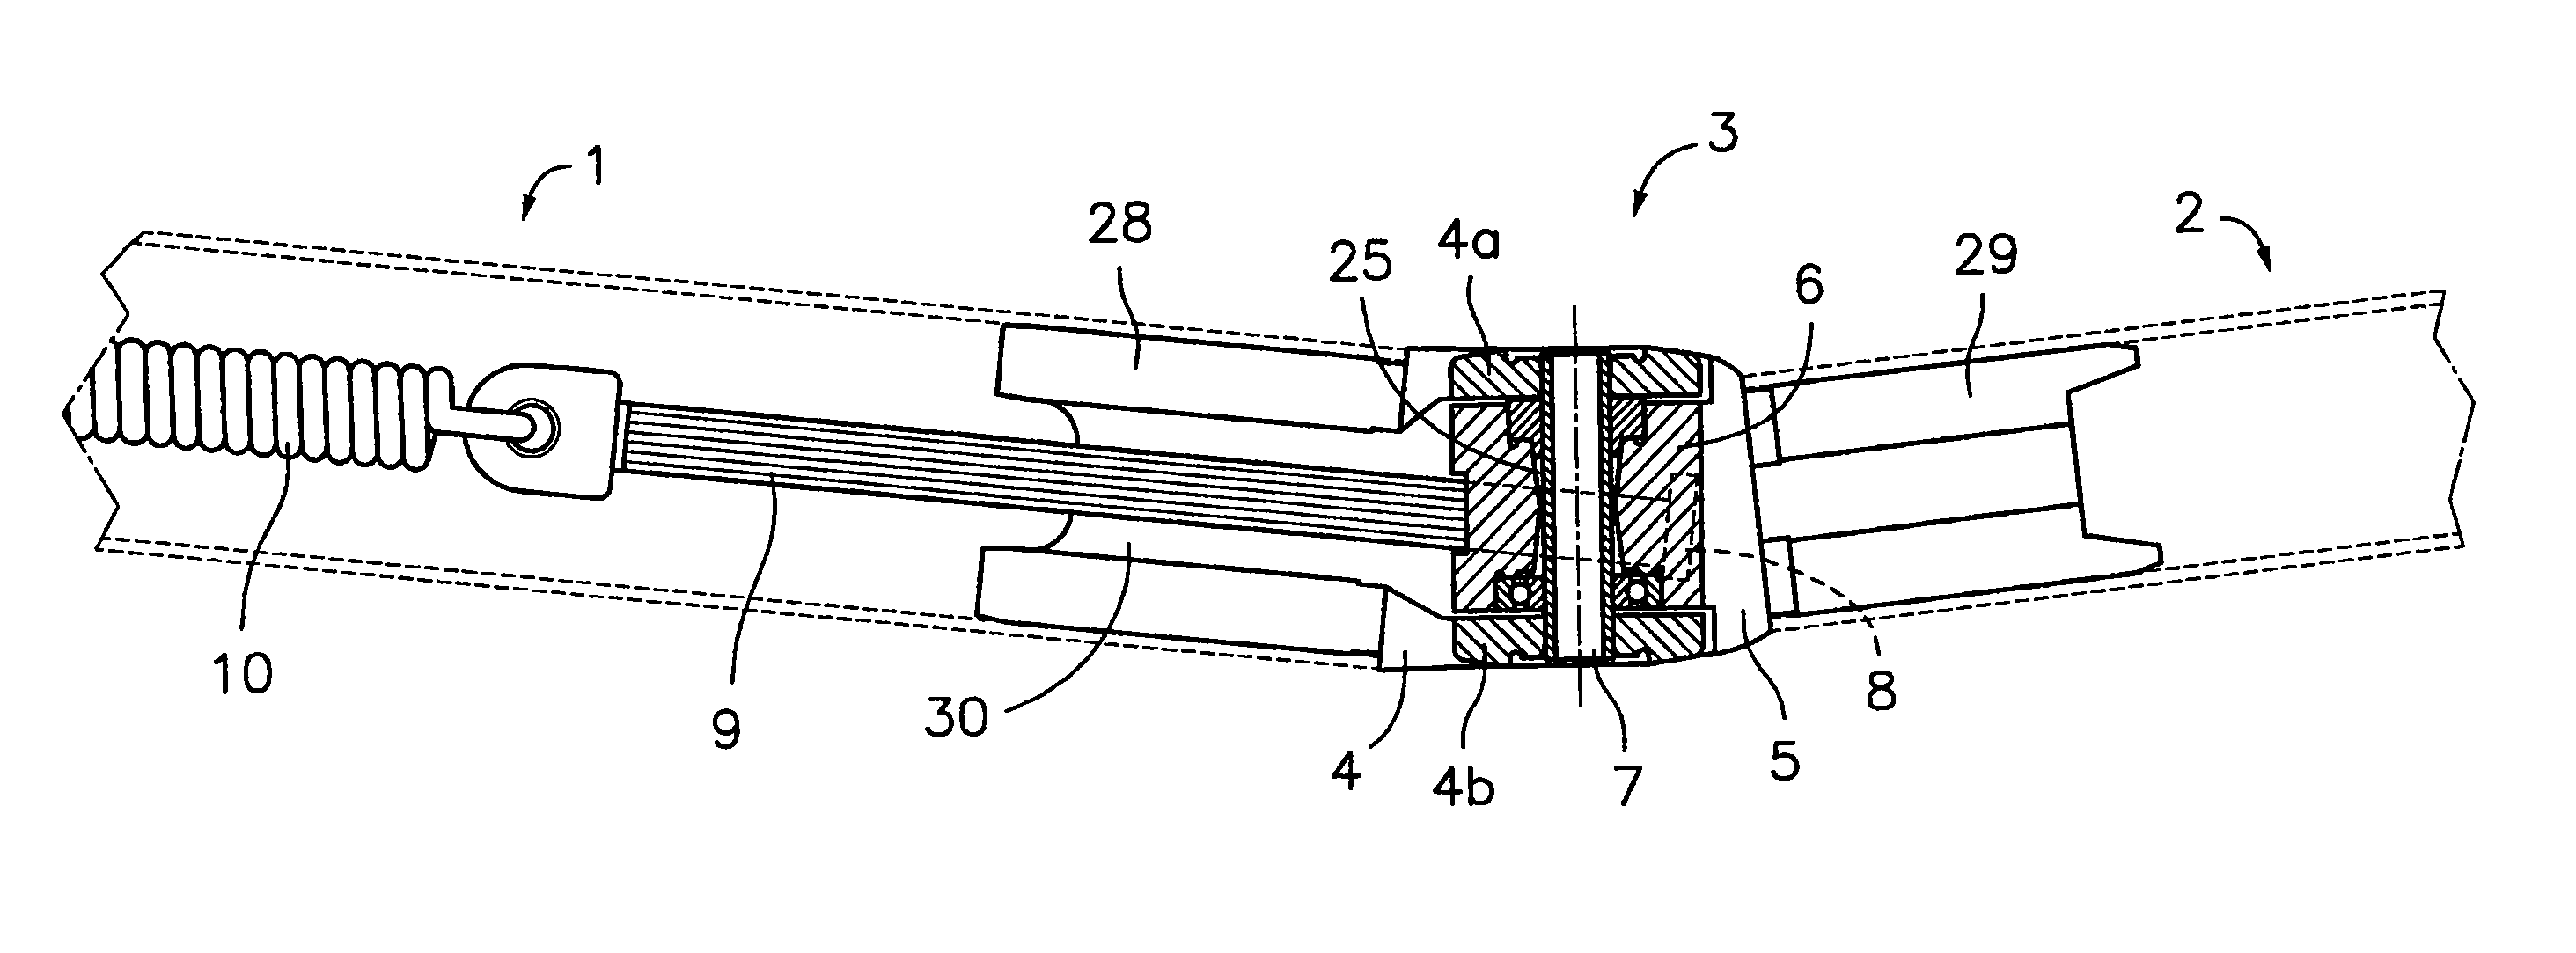 Articulation device for an awning elbow joint